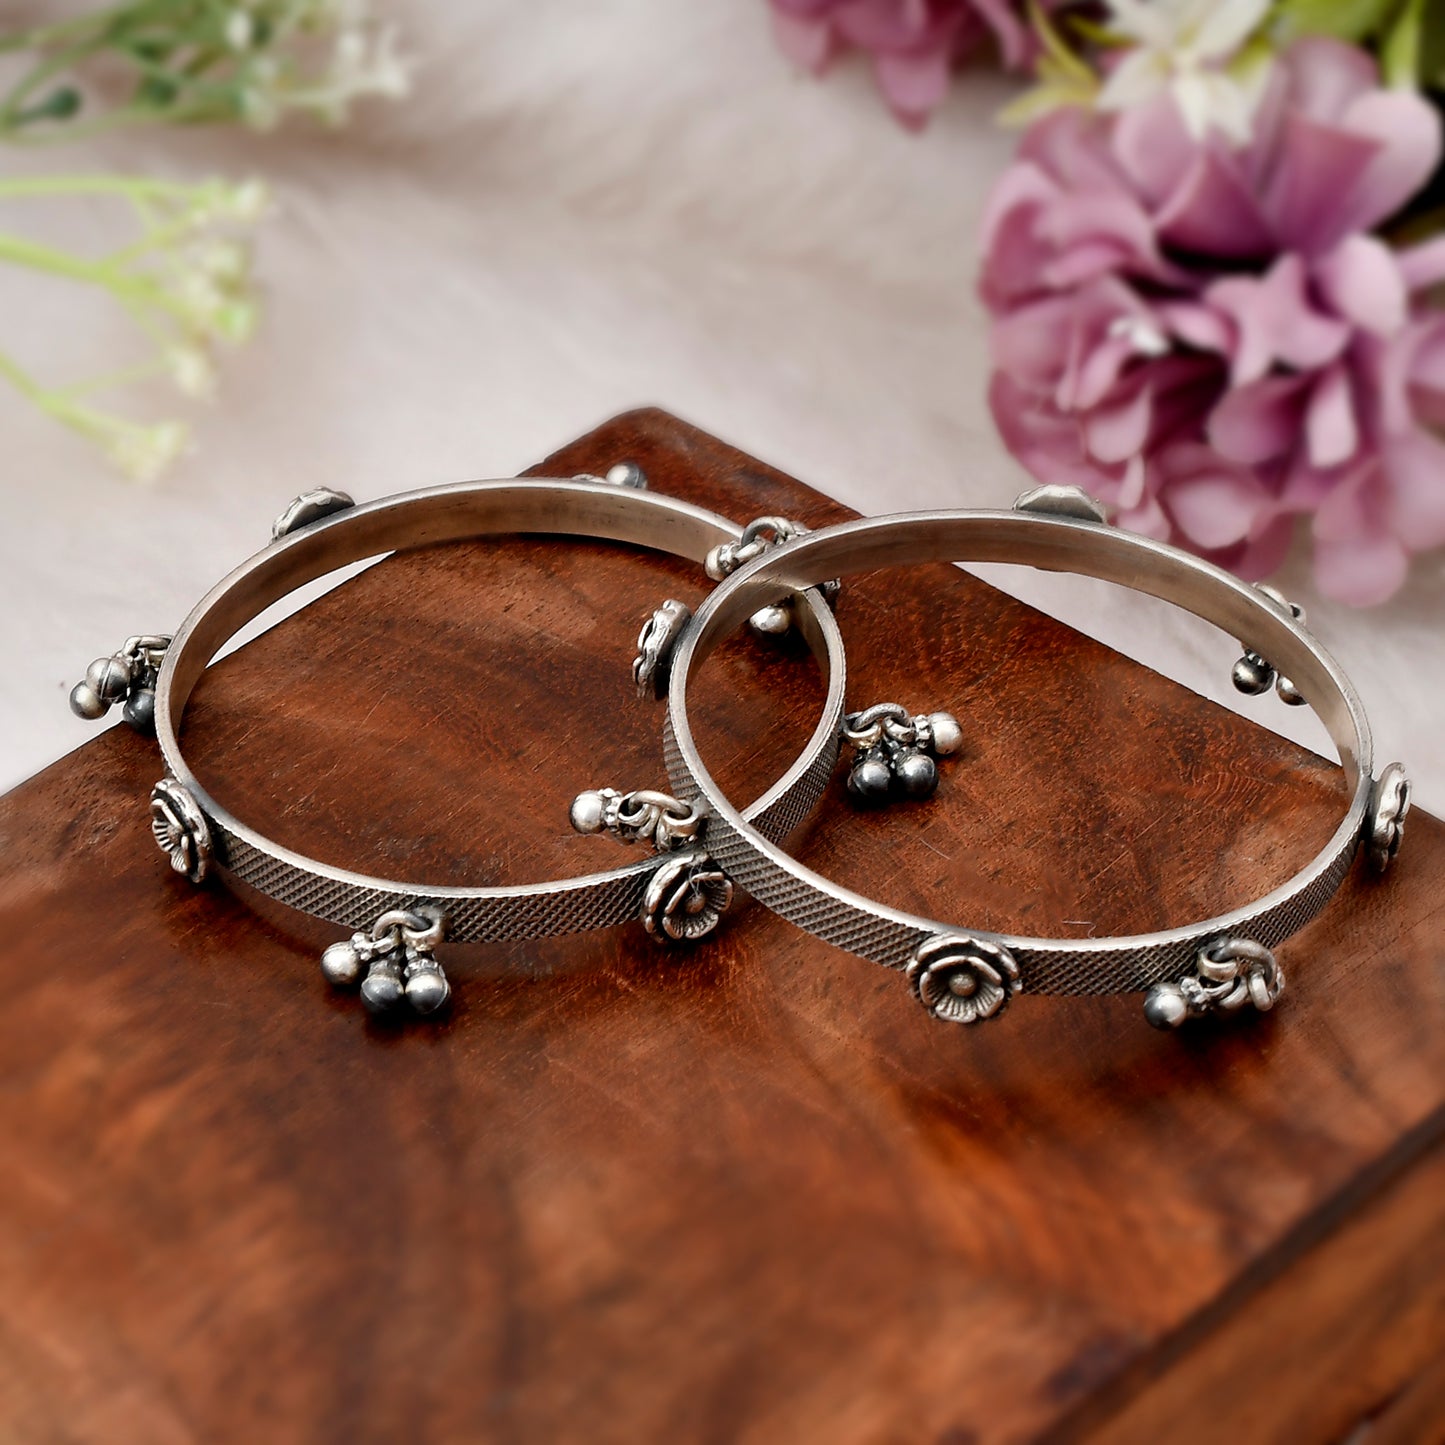 Vintage Look Flower Silver Bangles - 925 Sterling Silver Bangles - Oxidized Ethnic Bangles - Indian Jewelry - Size 2.4 Inch (Inner Diameter)